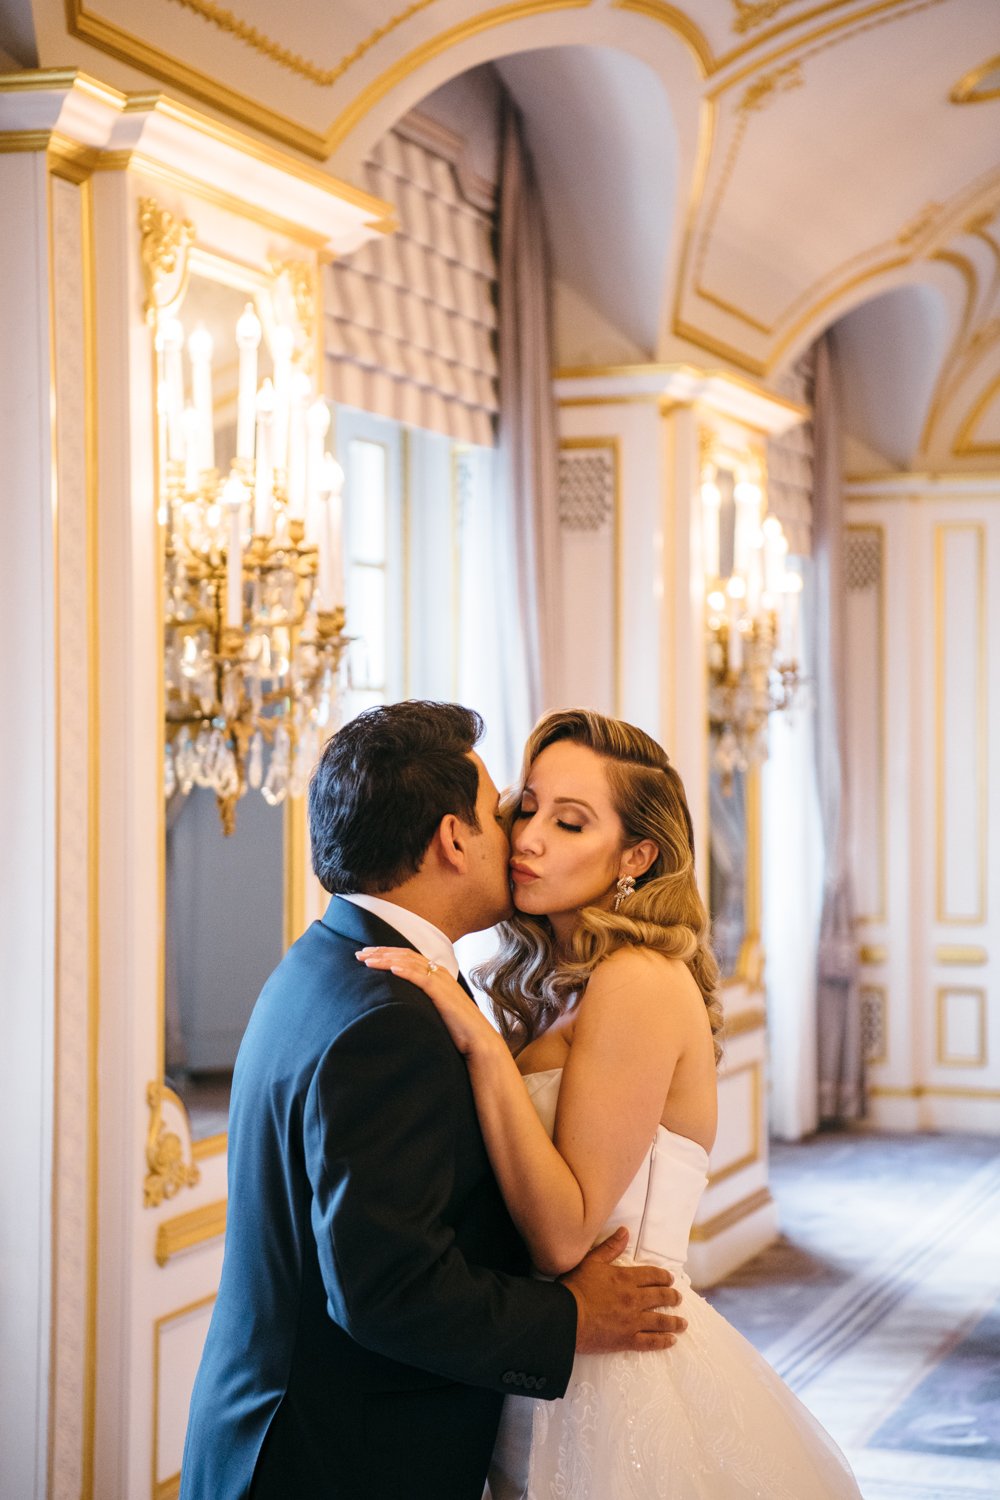 Bride and groom stand in the St. Regis in Manhattan. Groom has his hands around her waist and they kiss each other on the cheek.

Manhattan Luxury Wedding. New York Luxury Wedding Photographer. Wedding in Manhattan. NYC Luxury Wedding.